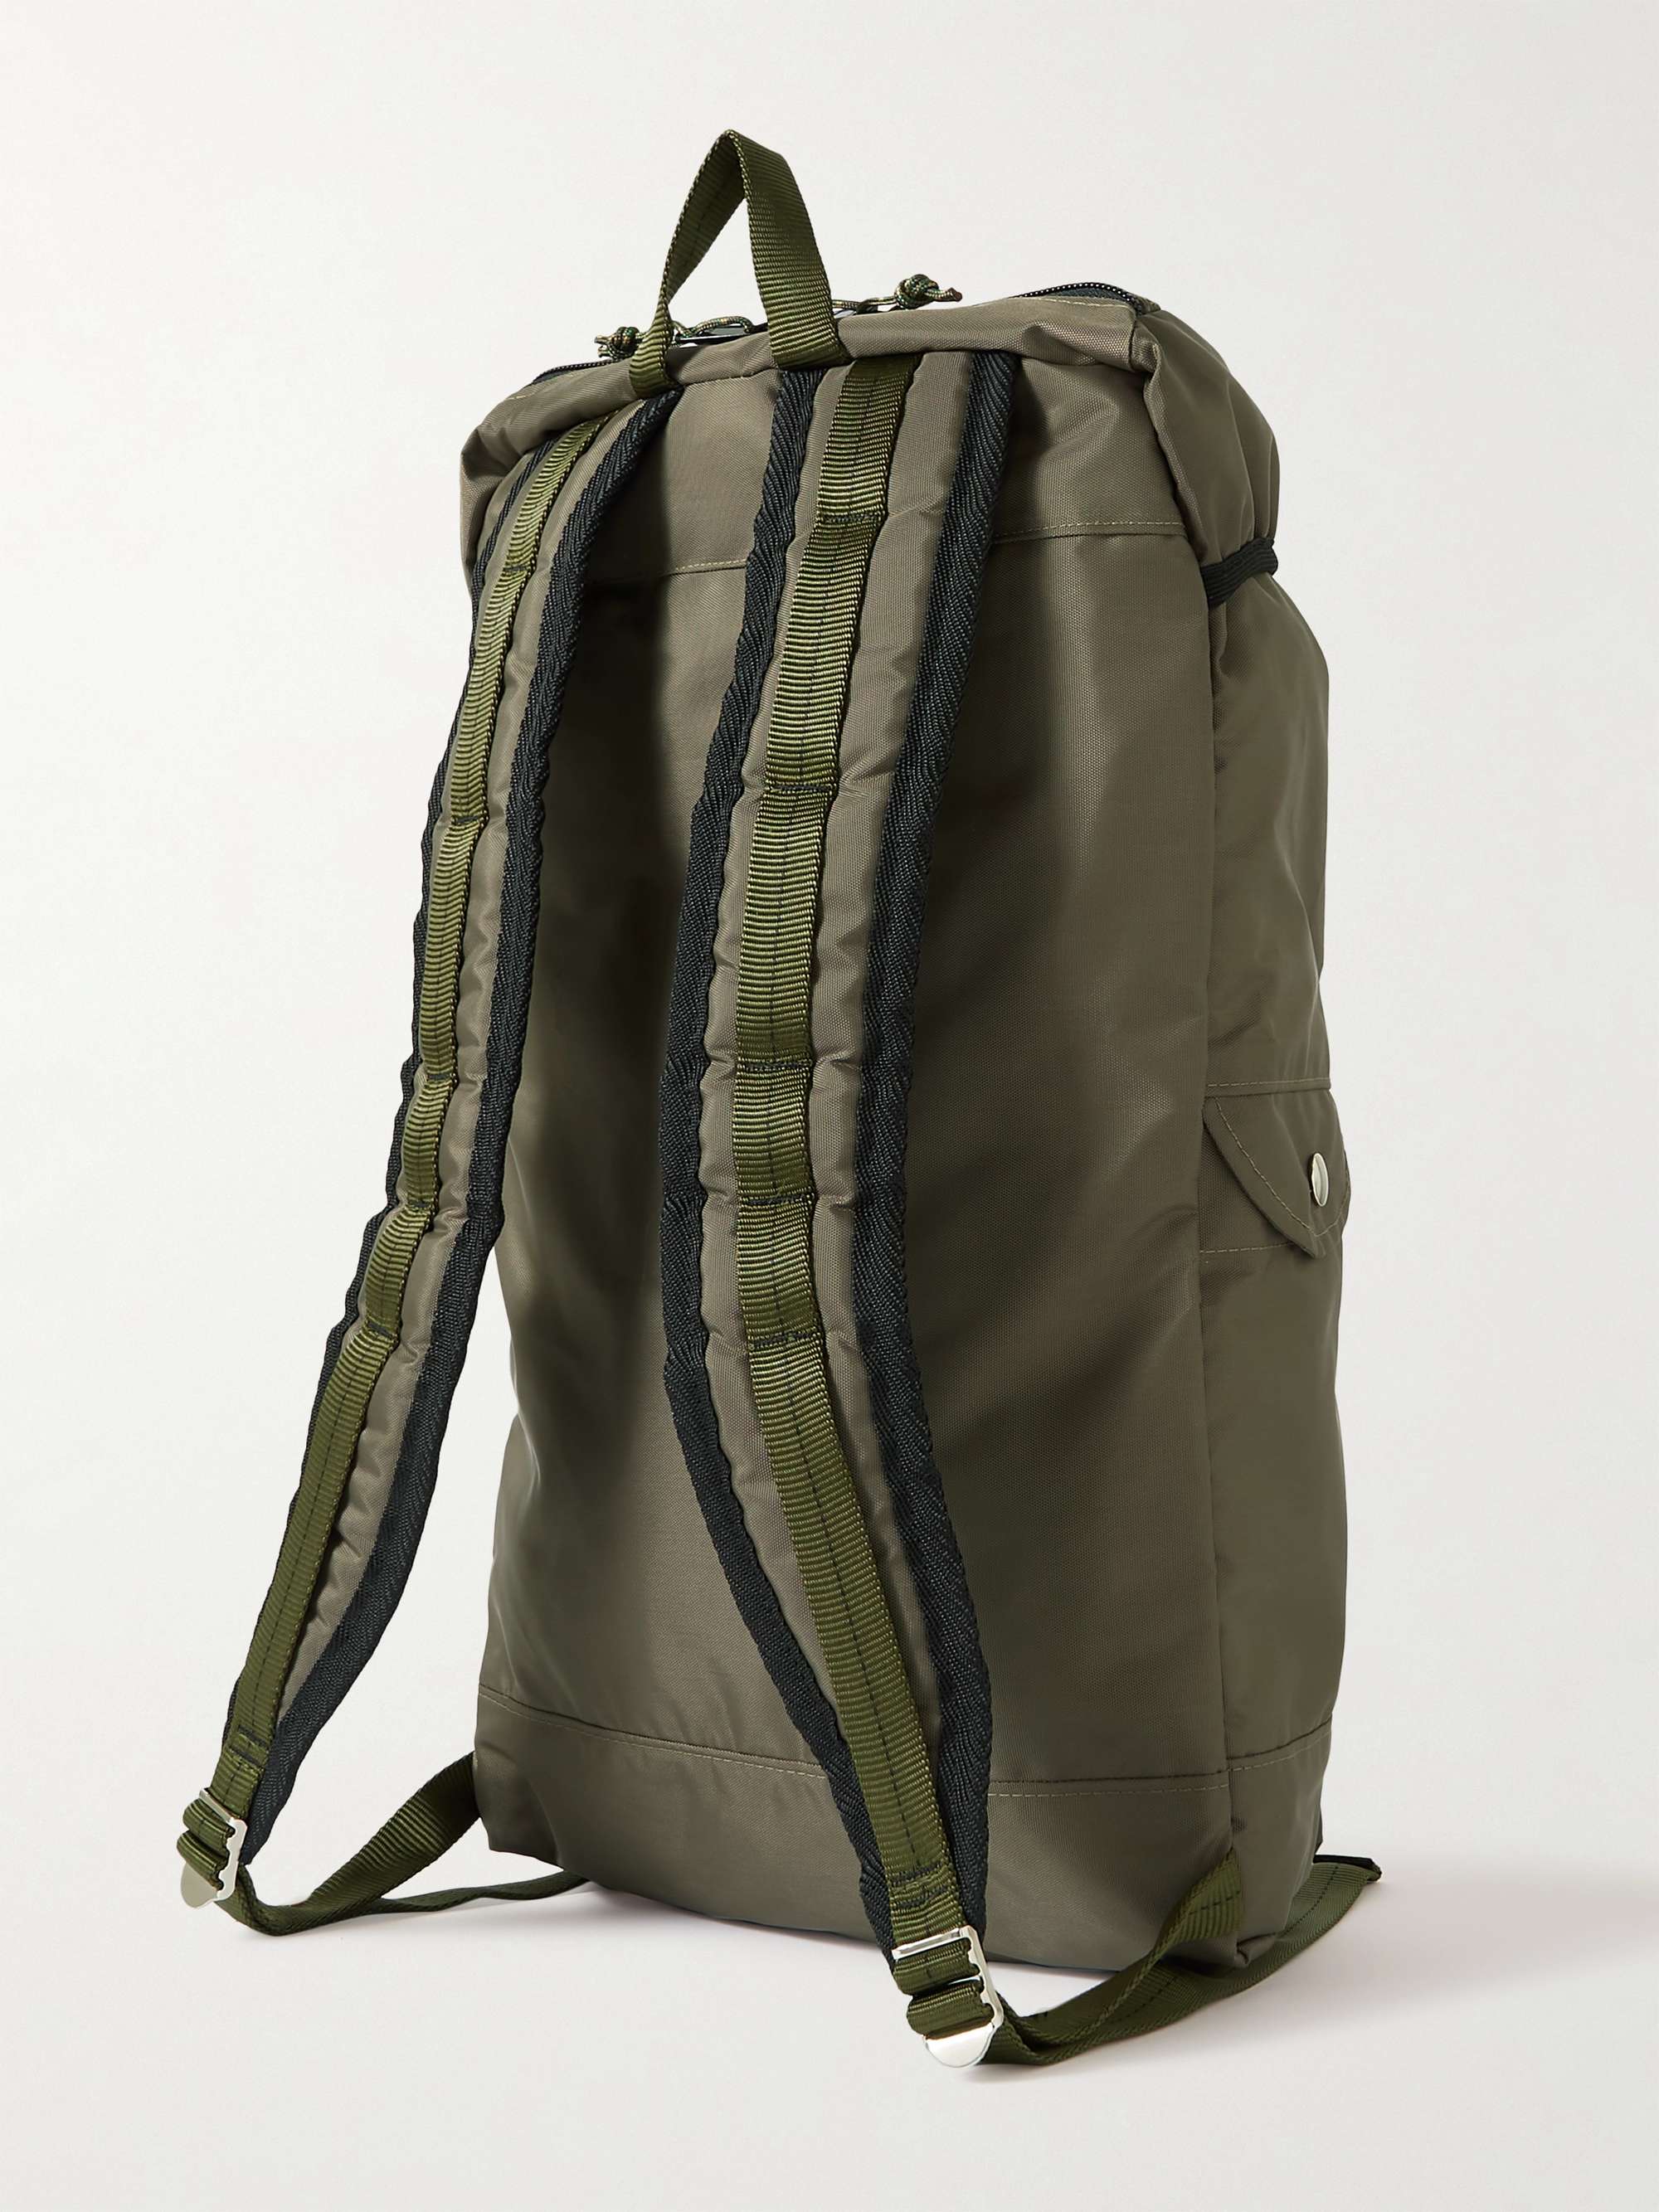 EPPERSON MOUNTAINEERING Climb Pack Medium Logo-Appliquéd Recycled CORDURA Backpack